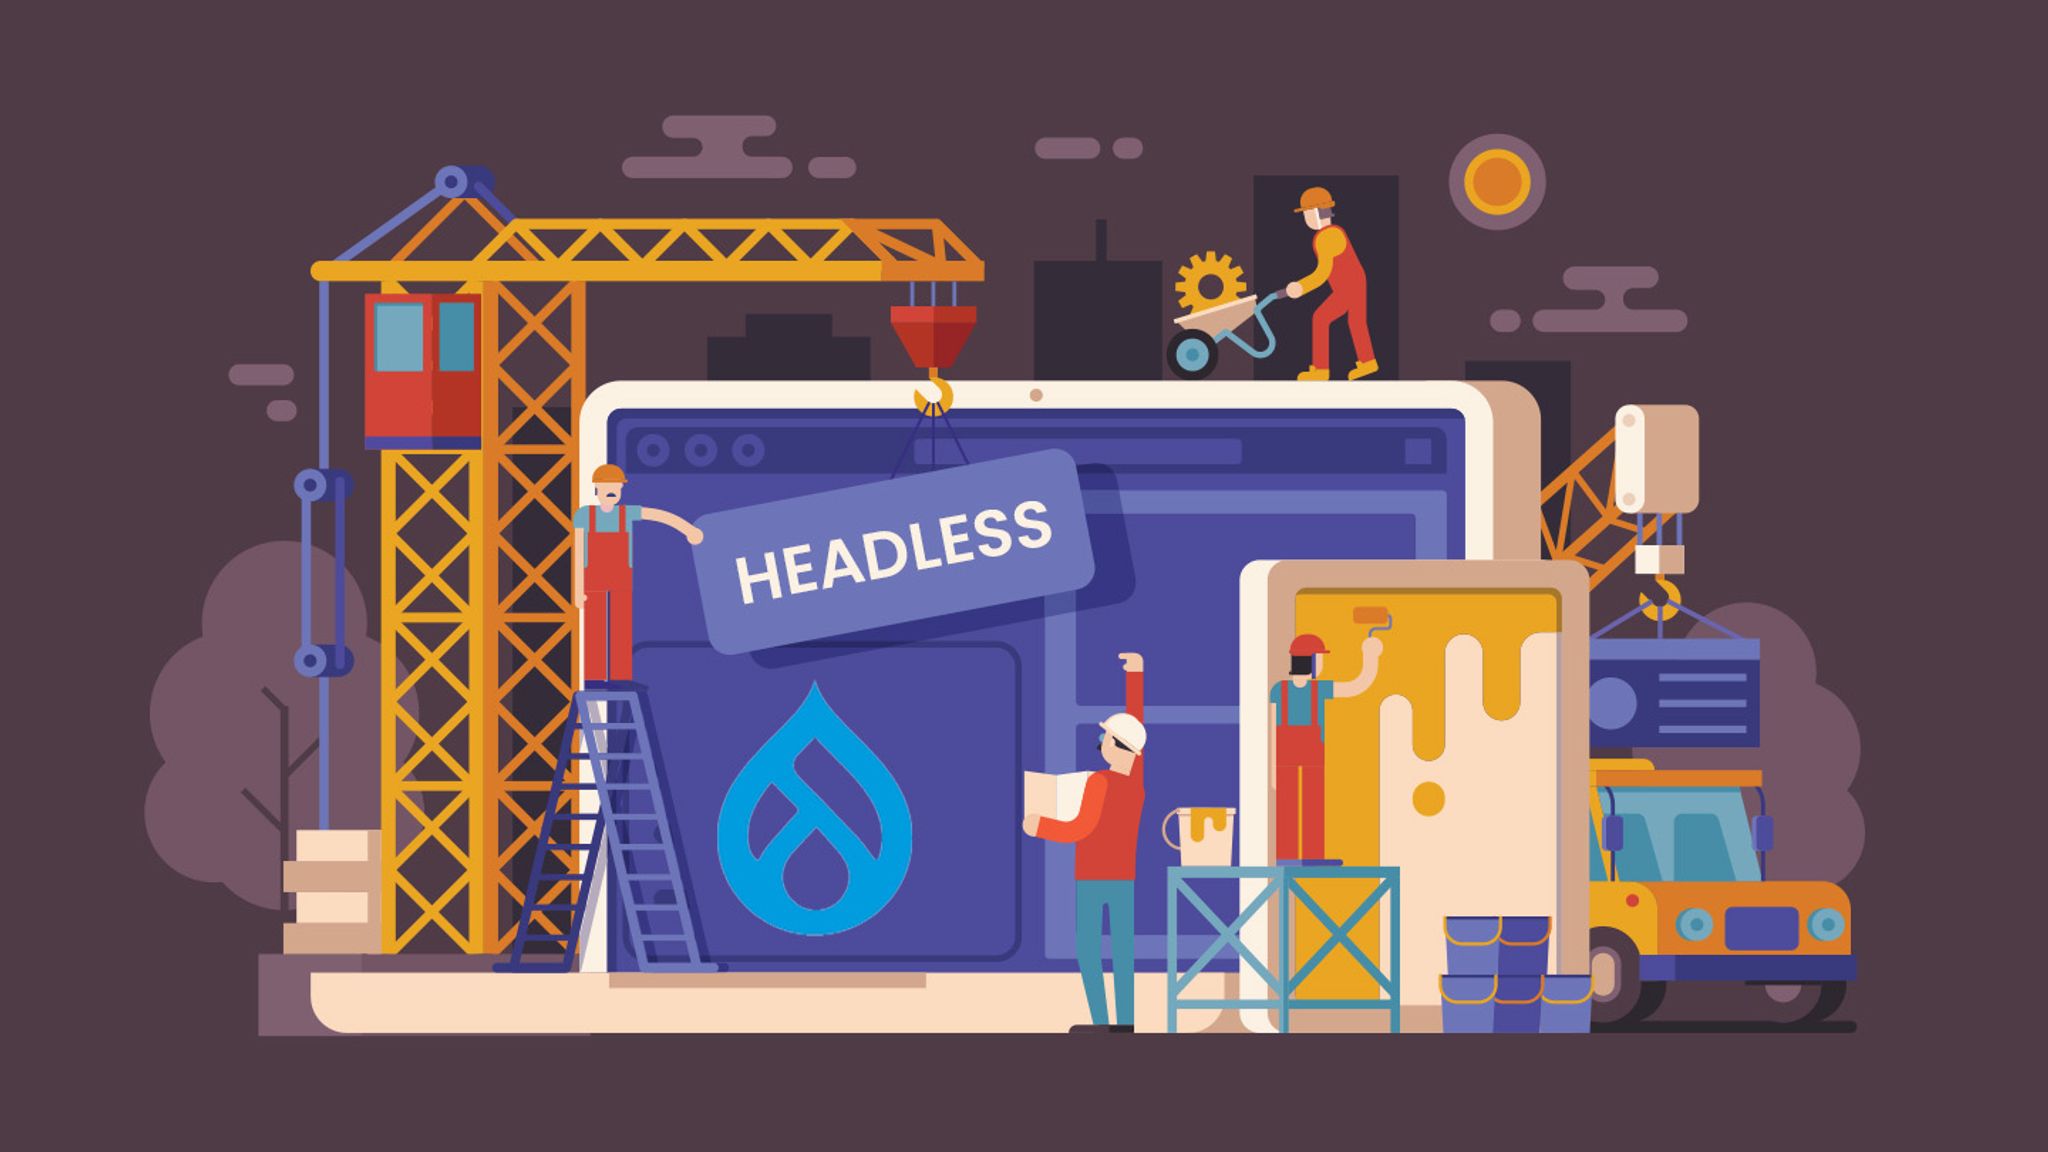 Vector illustration of people building a website with the word "headless" in the artwork of a computer, and the Drupal logo on the screen.